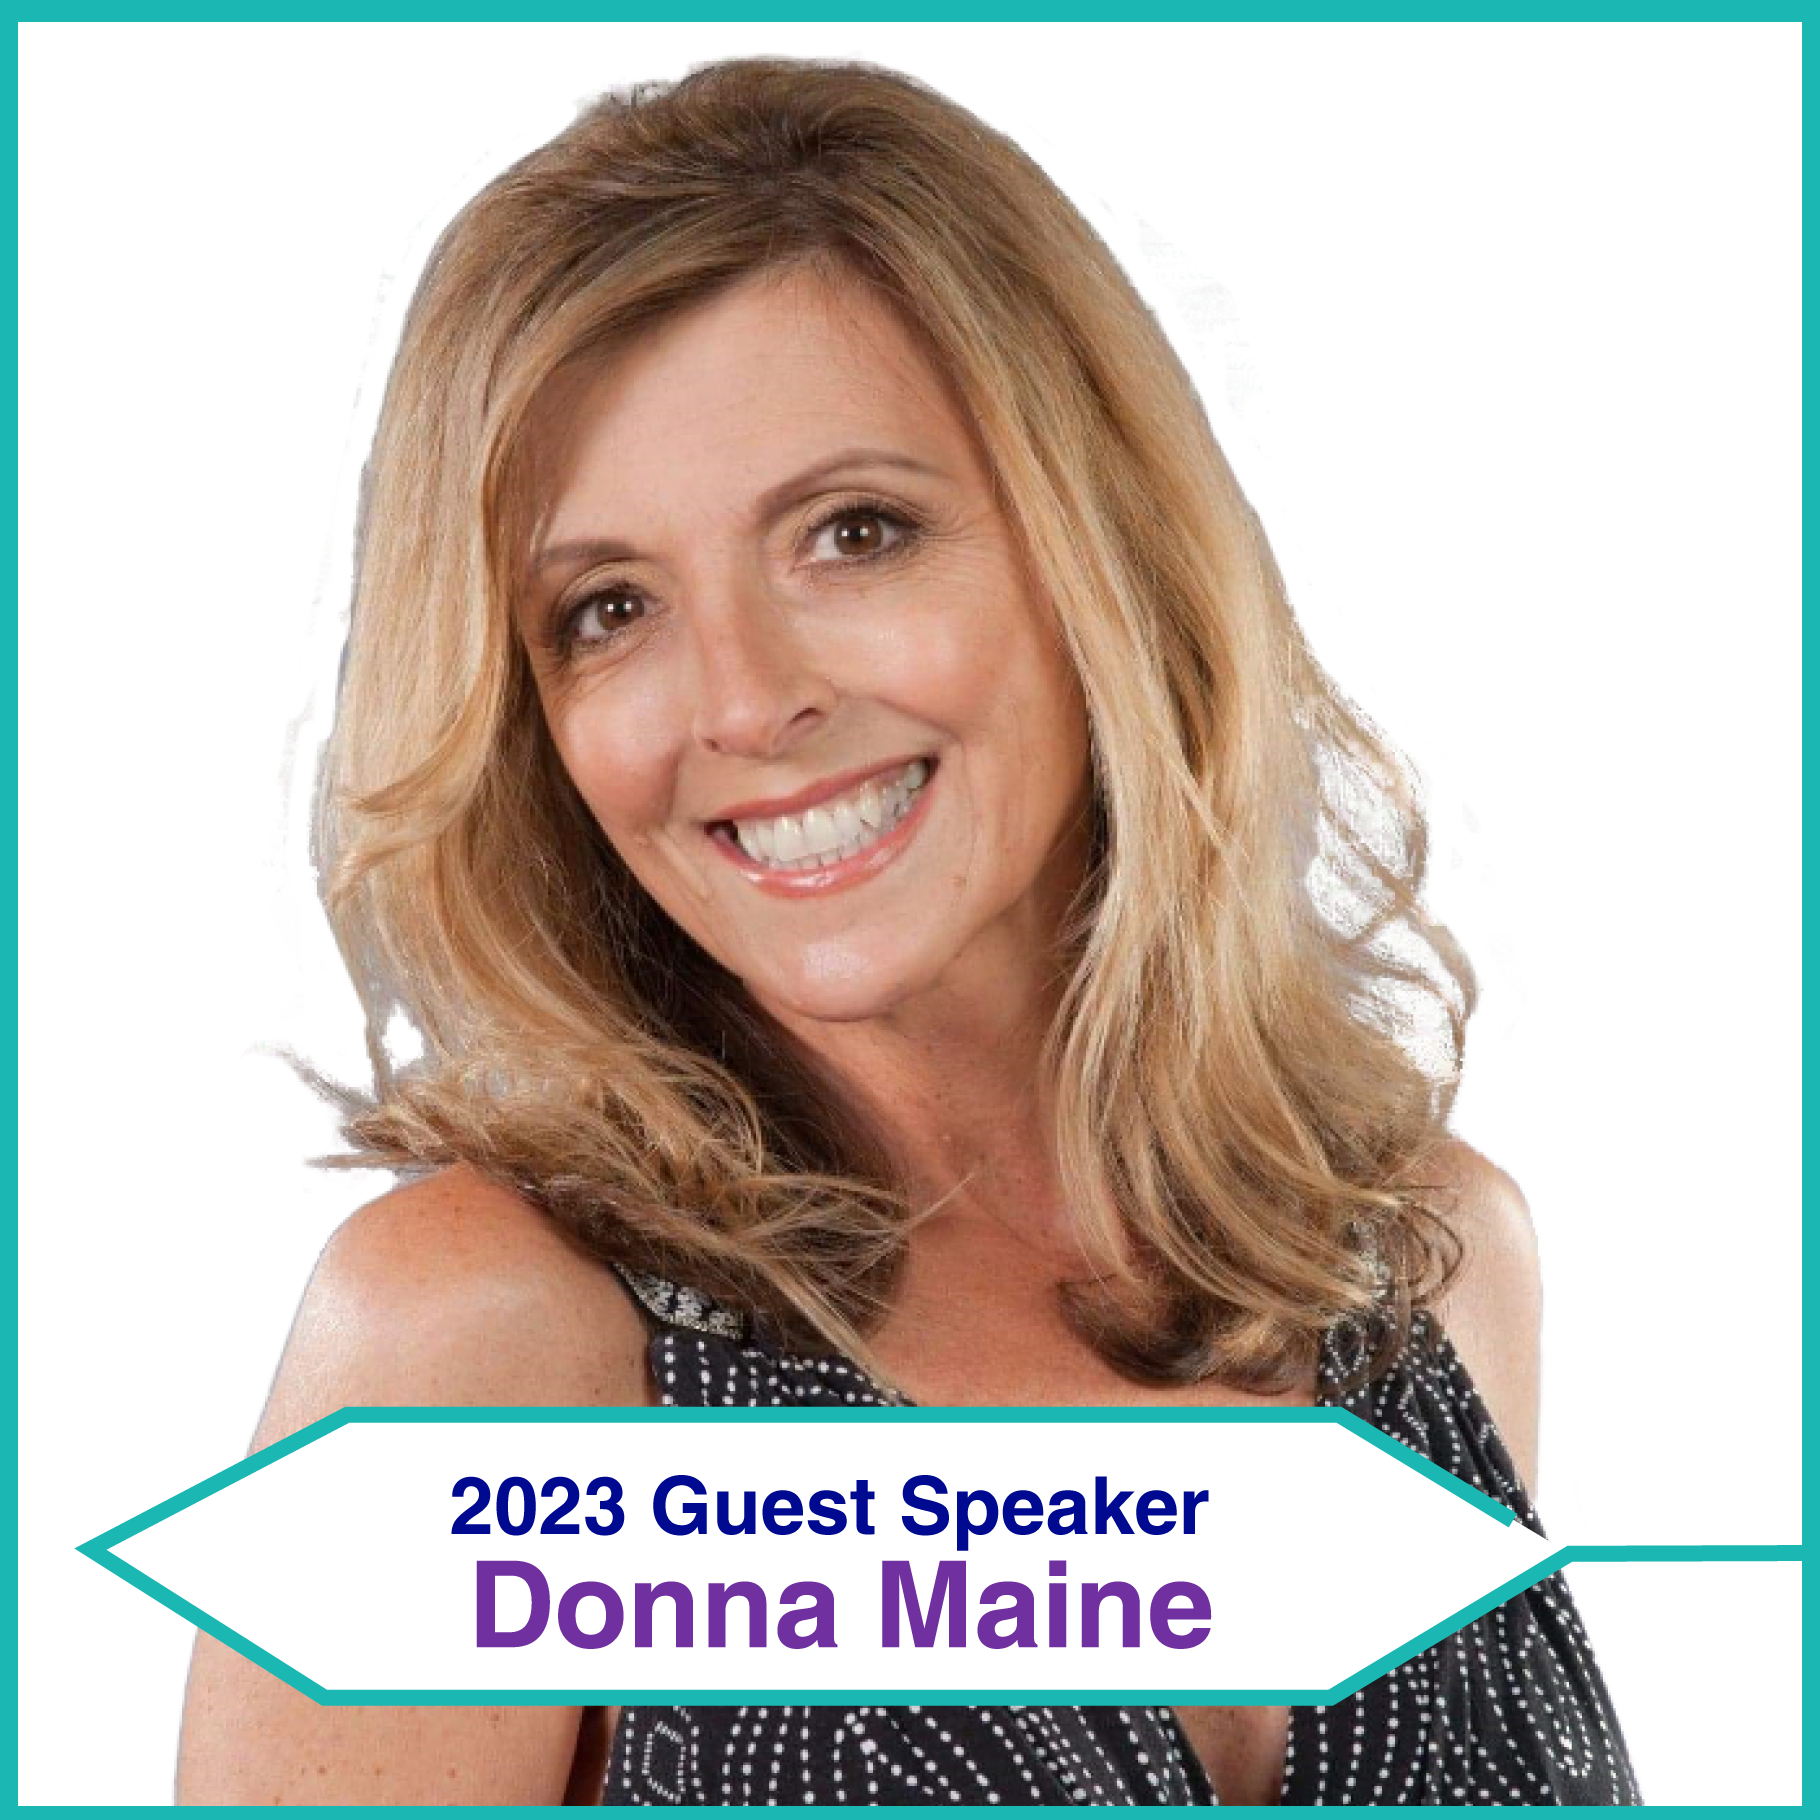 https://digifesttemecula.org/wp-content/uploads/2023/03/Donna_Maine.png